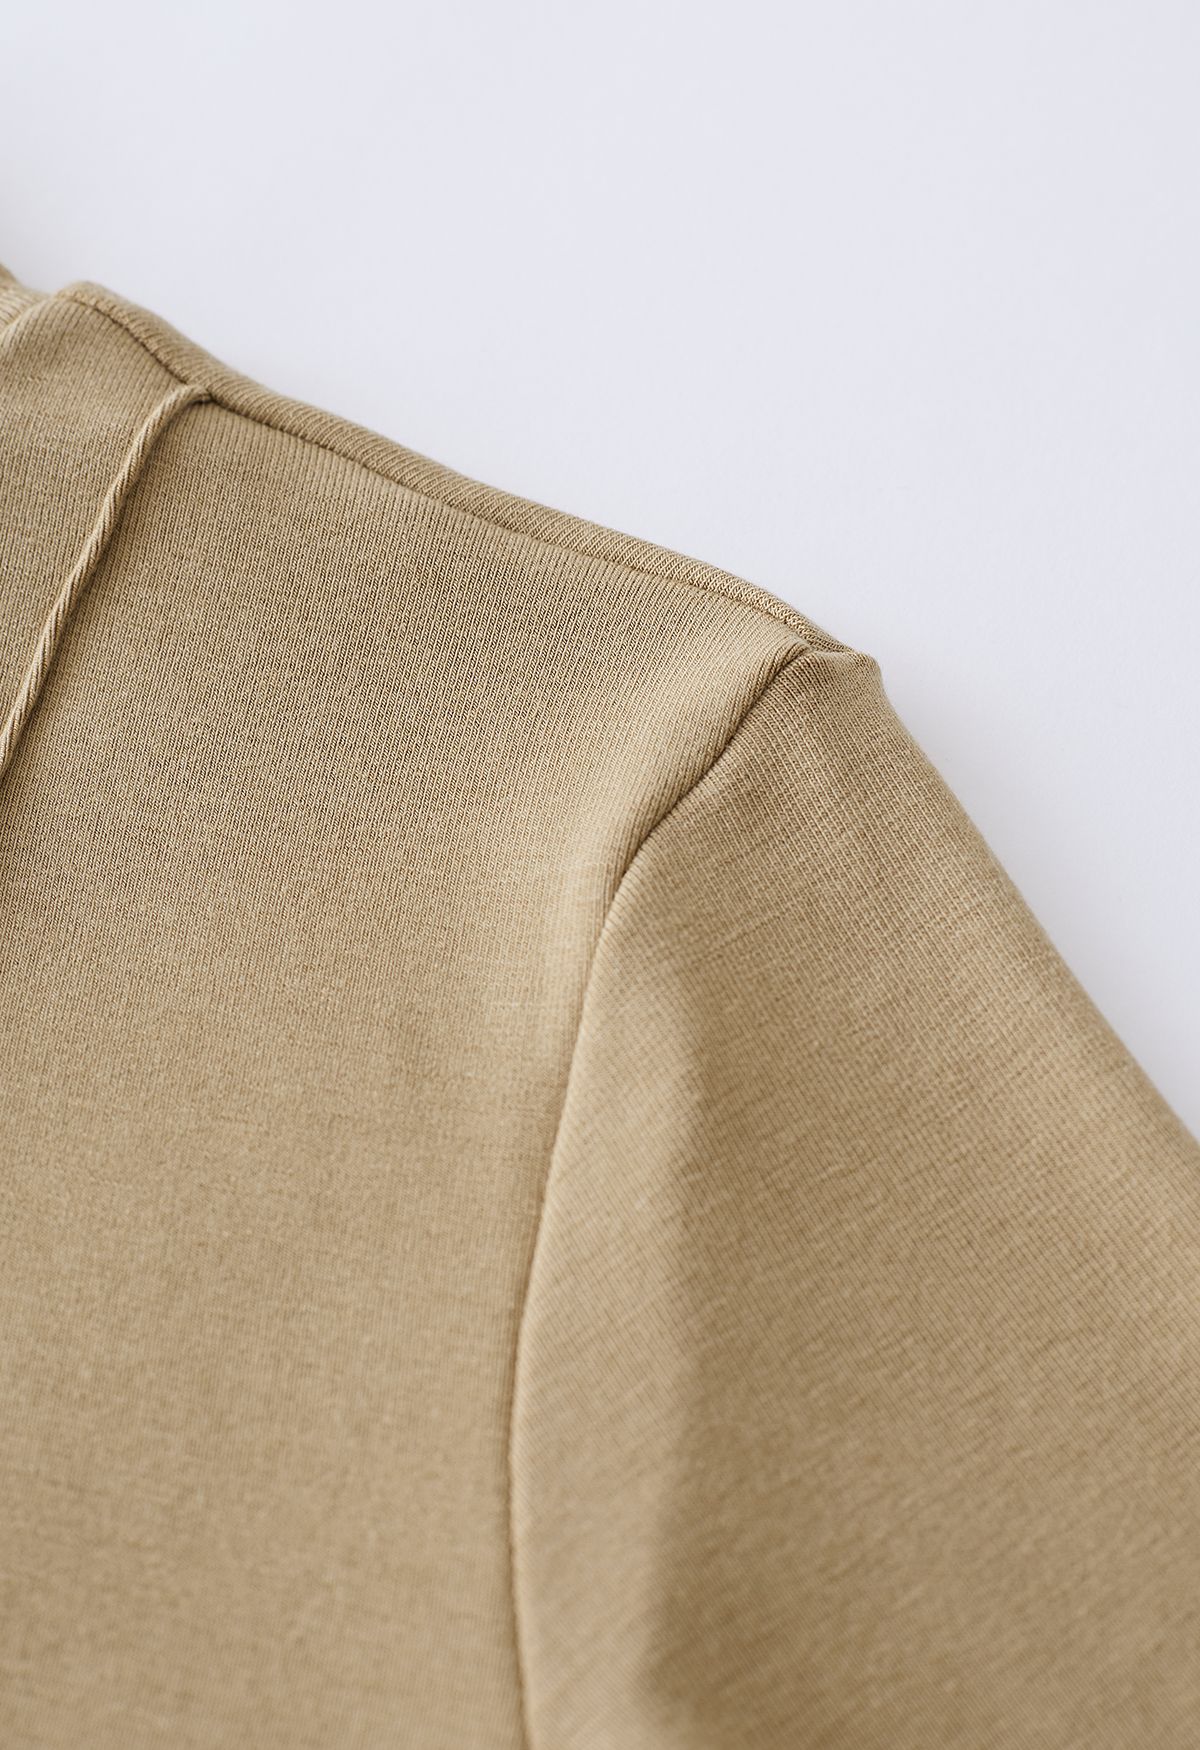 Embossed Seam Detail High Neck Knit Top in Camel